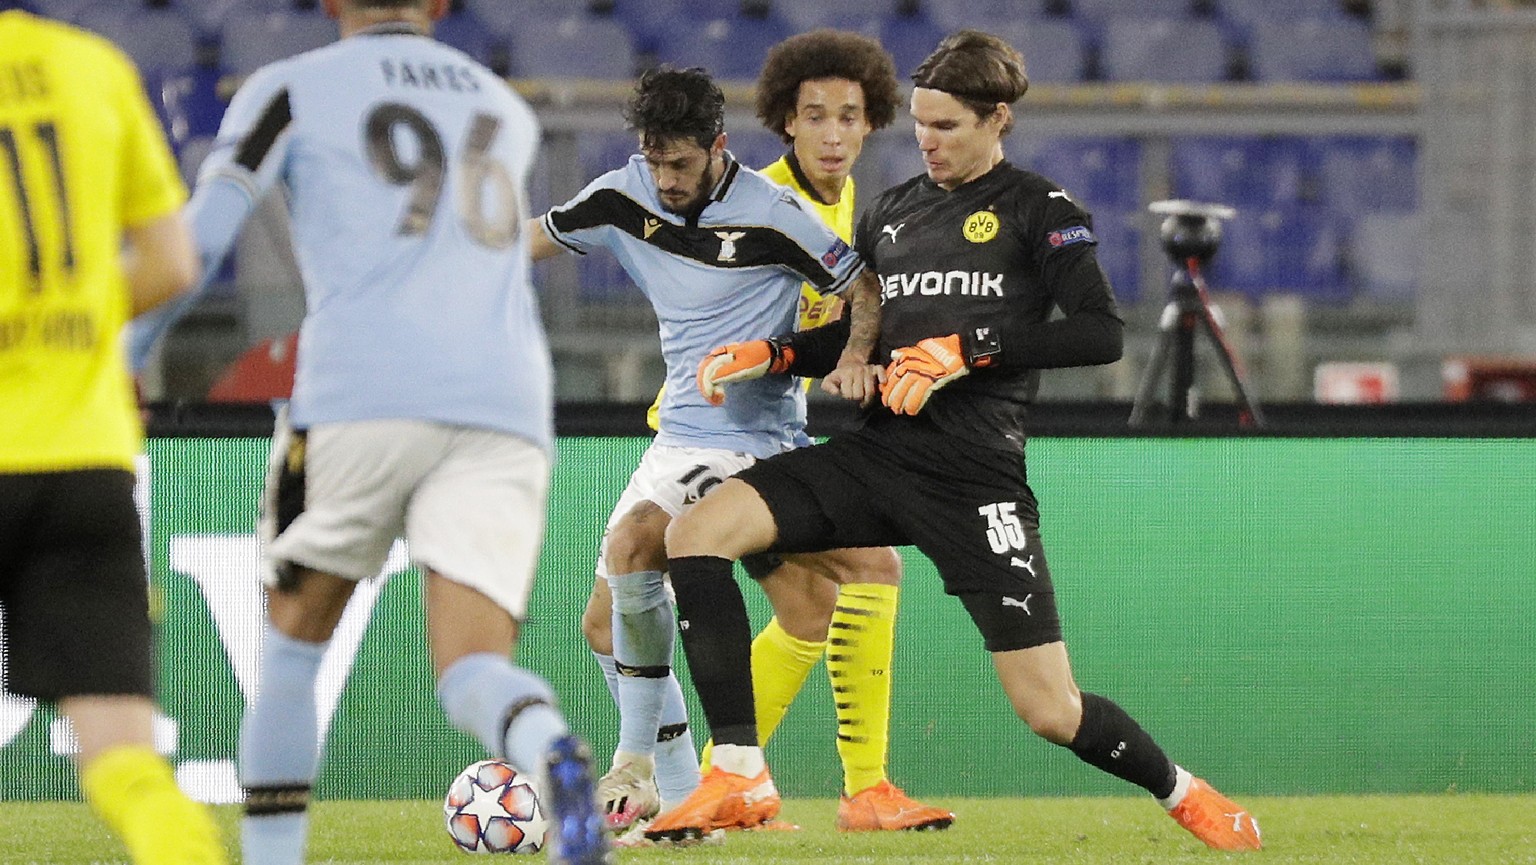 Dortmund&#039;s goalkeeper Marwin Hitz, right, challenges for the ball with Lazio&#039;s Luis Alberto during the Champions League group F soccer match between Lazio and Borussia Dortmund at the Olympi ...